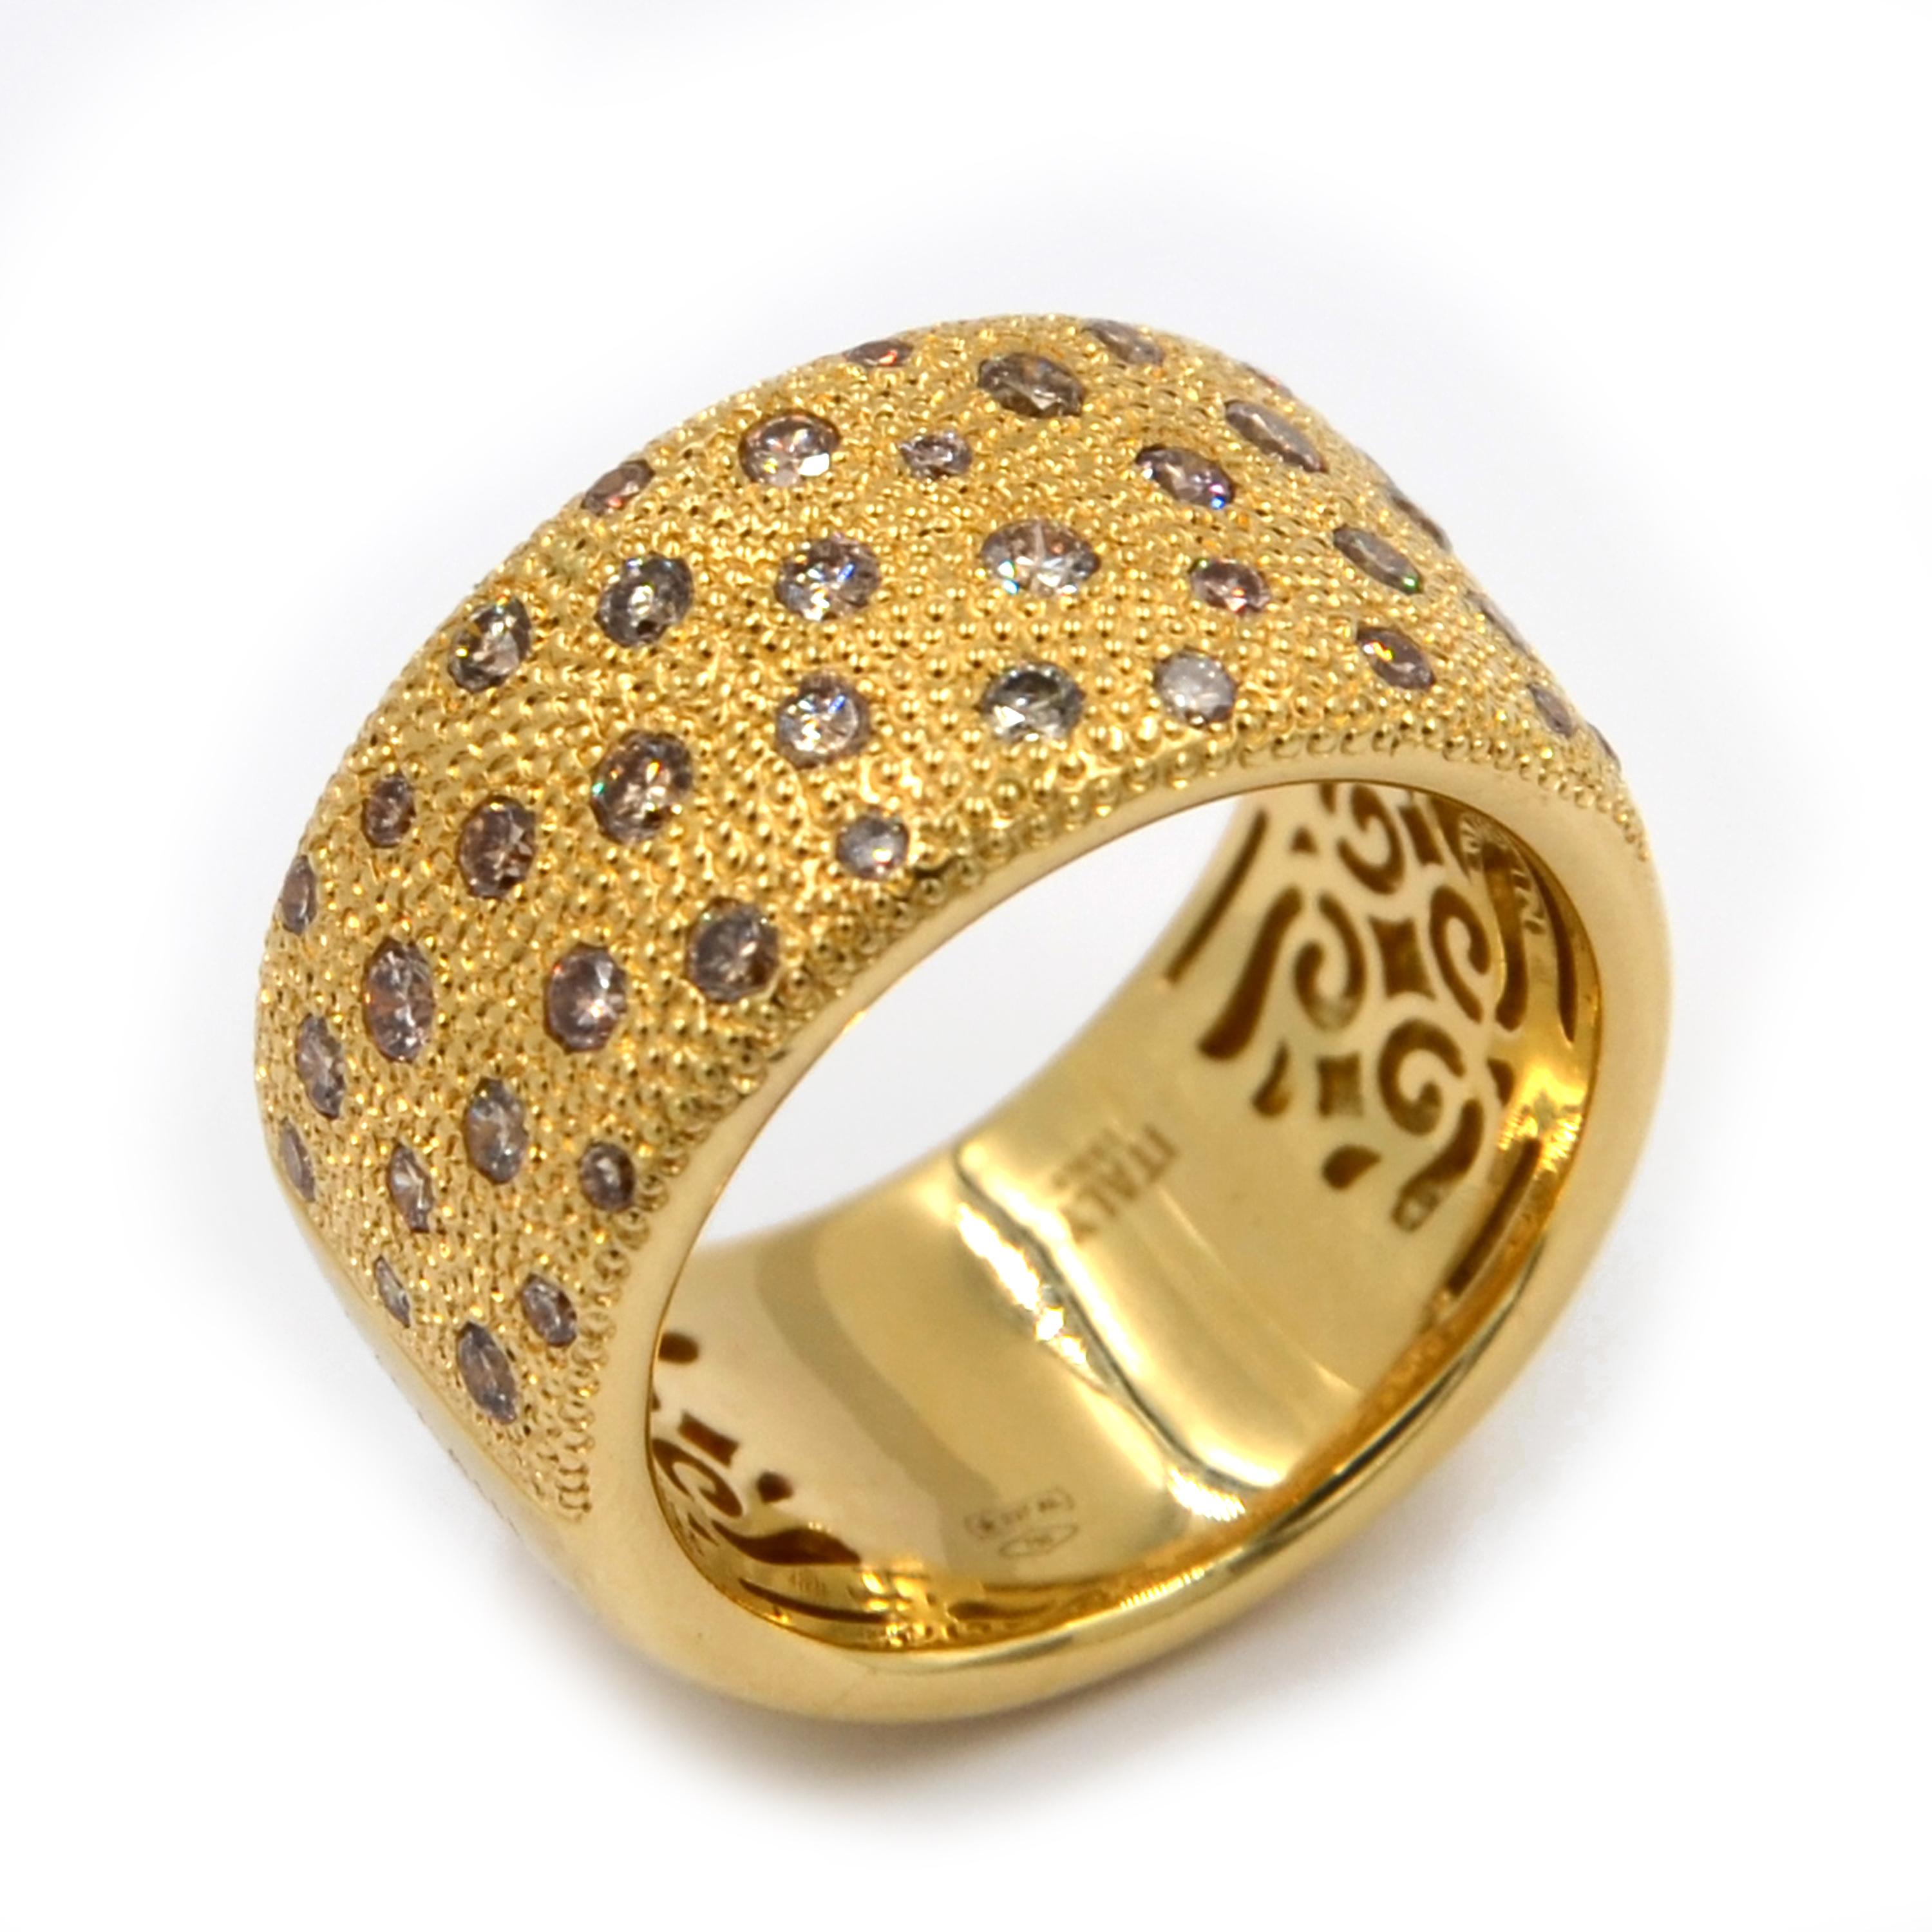 18 Karat Yellow Gold Brown Diamonds  GARAVELLI Band Ring , set in an artisanal scattered way, with hand hammered gold surface among the brown diamonds.
Finger size 55
The ring width is mm 12
18kt GOLD gr : 16,20
BROWN DIAMONDS ct : 0,96